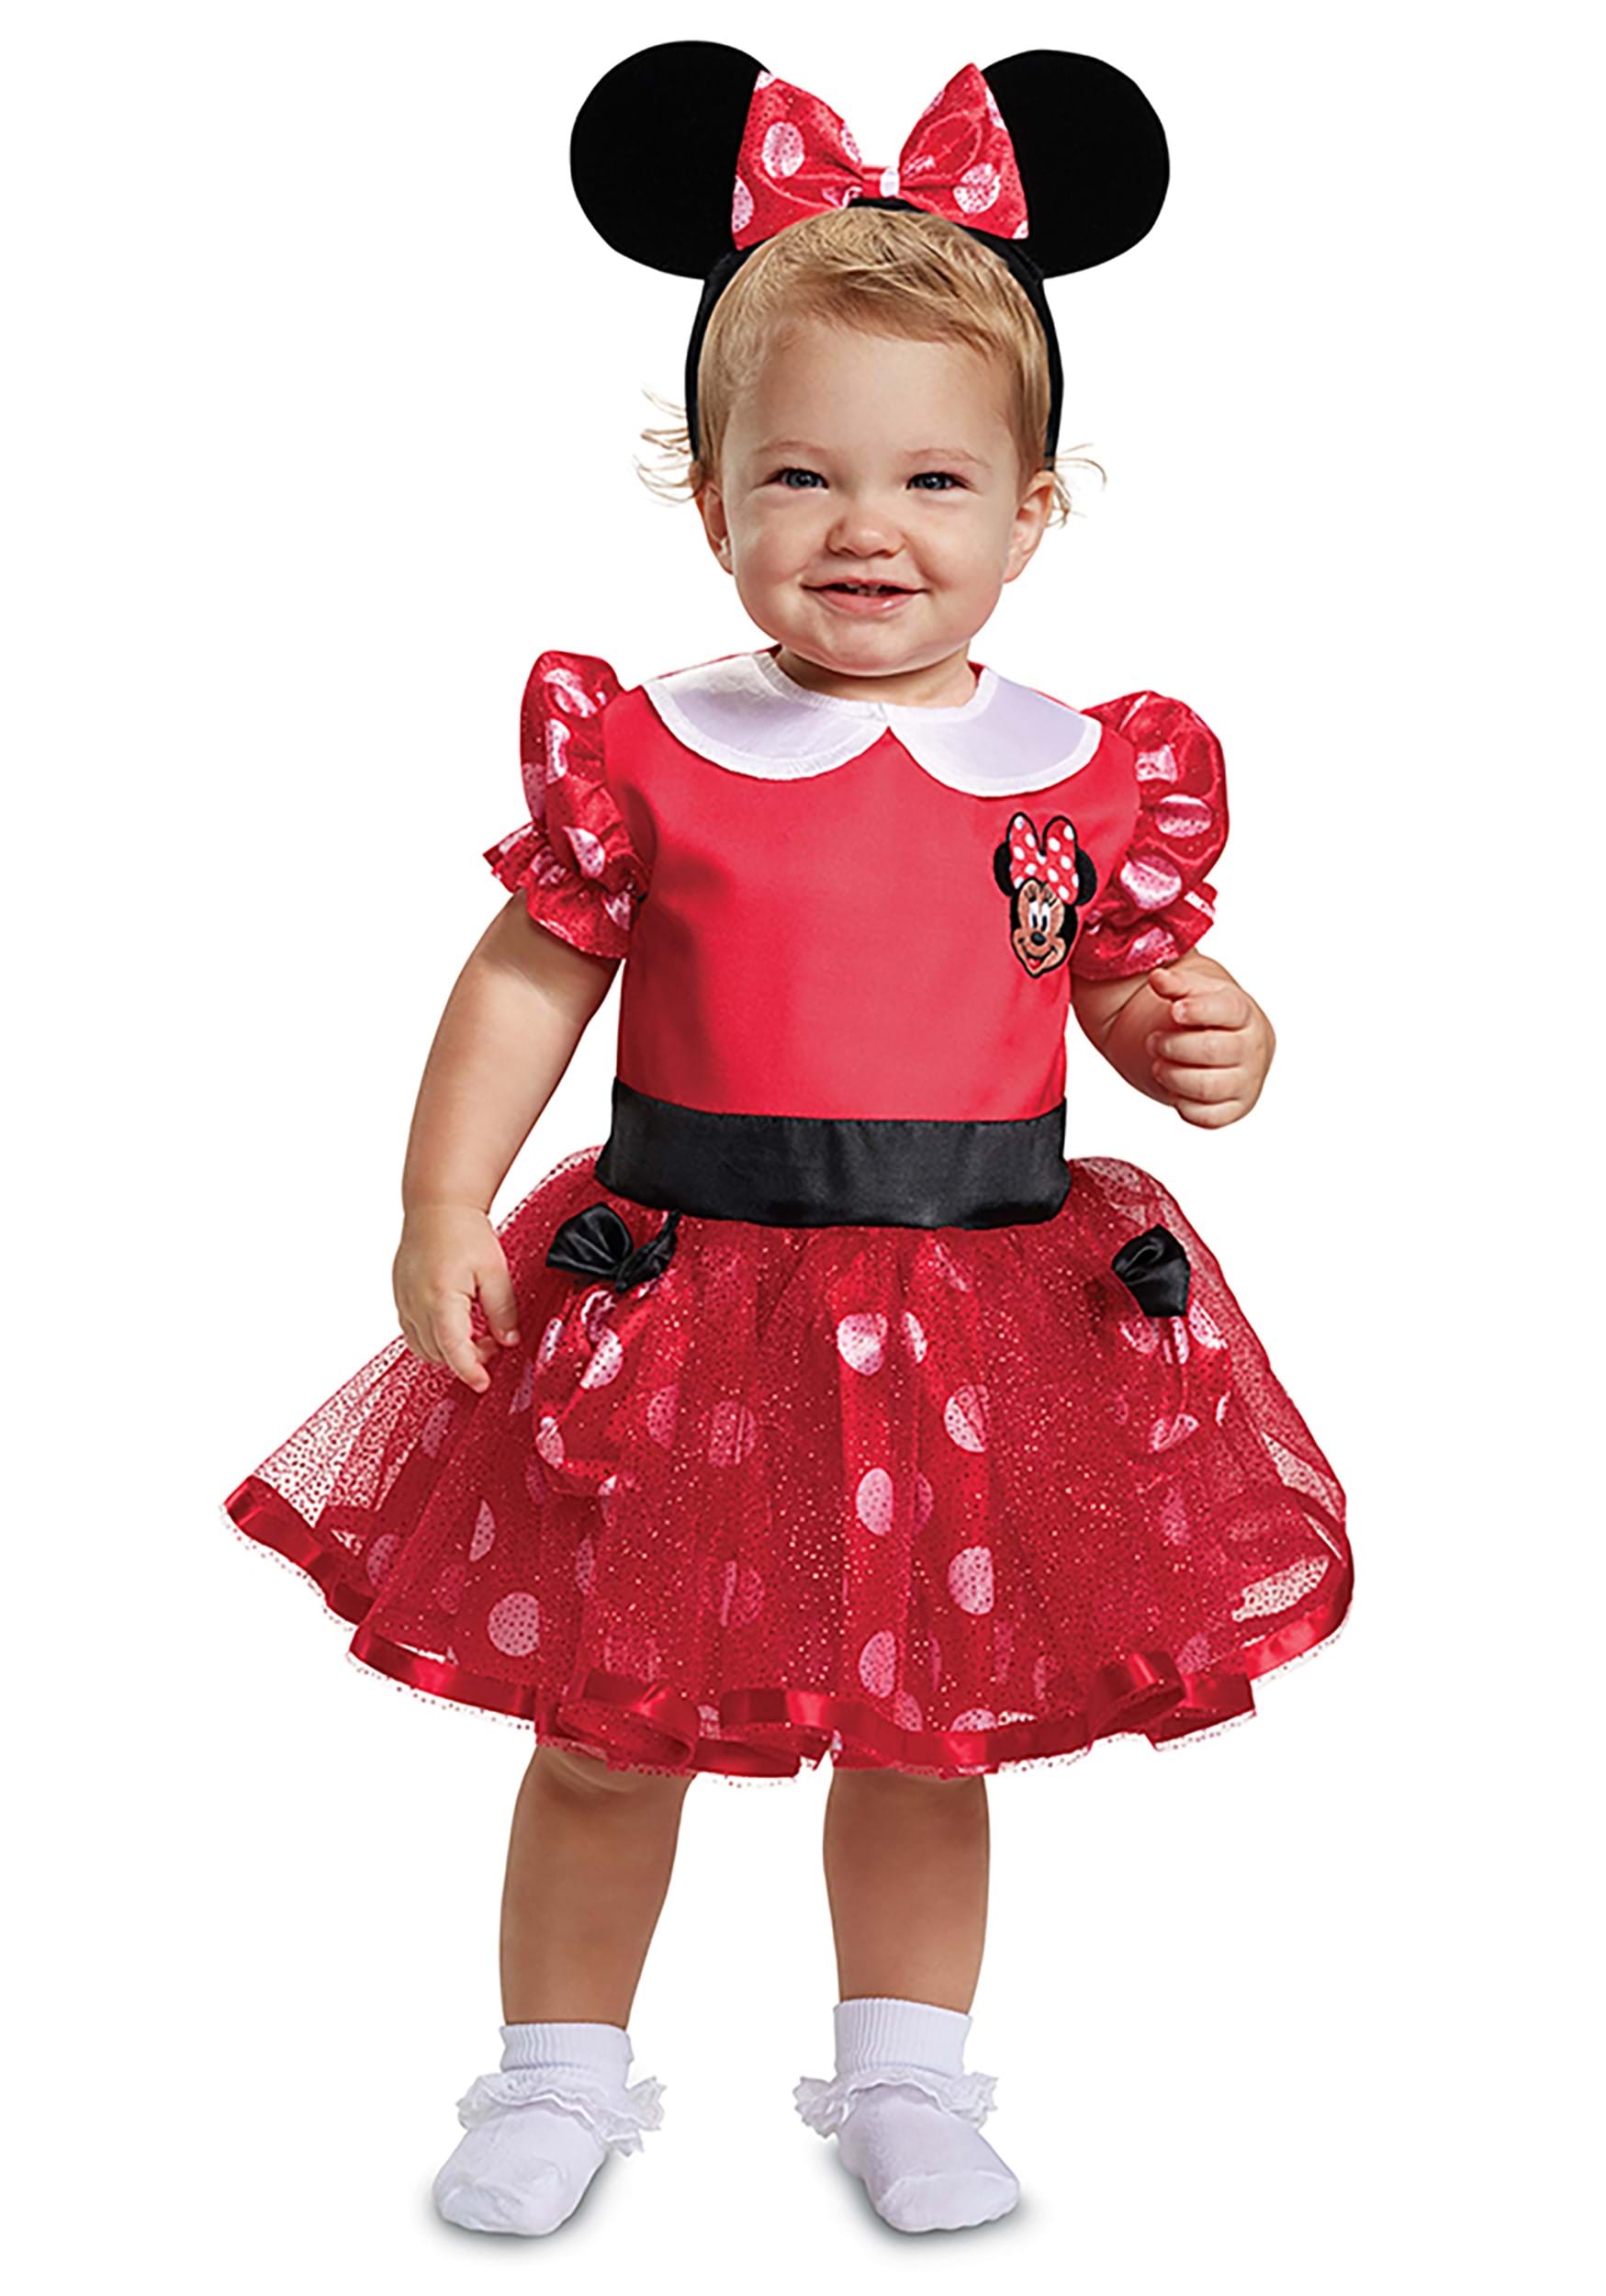 Minnie Mouse Witch Costume for Kids